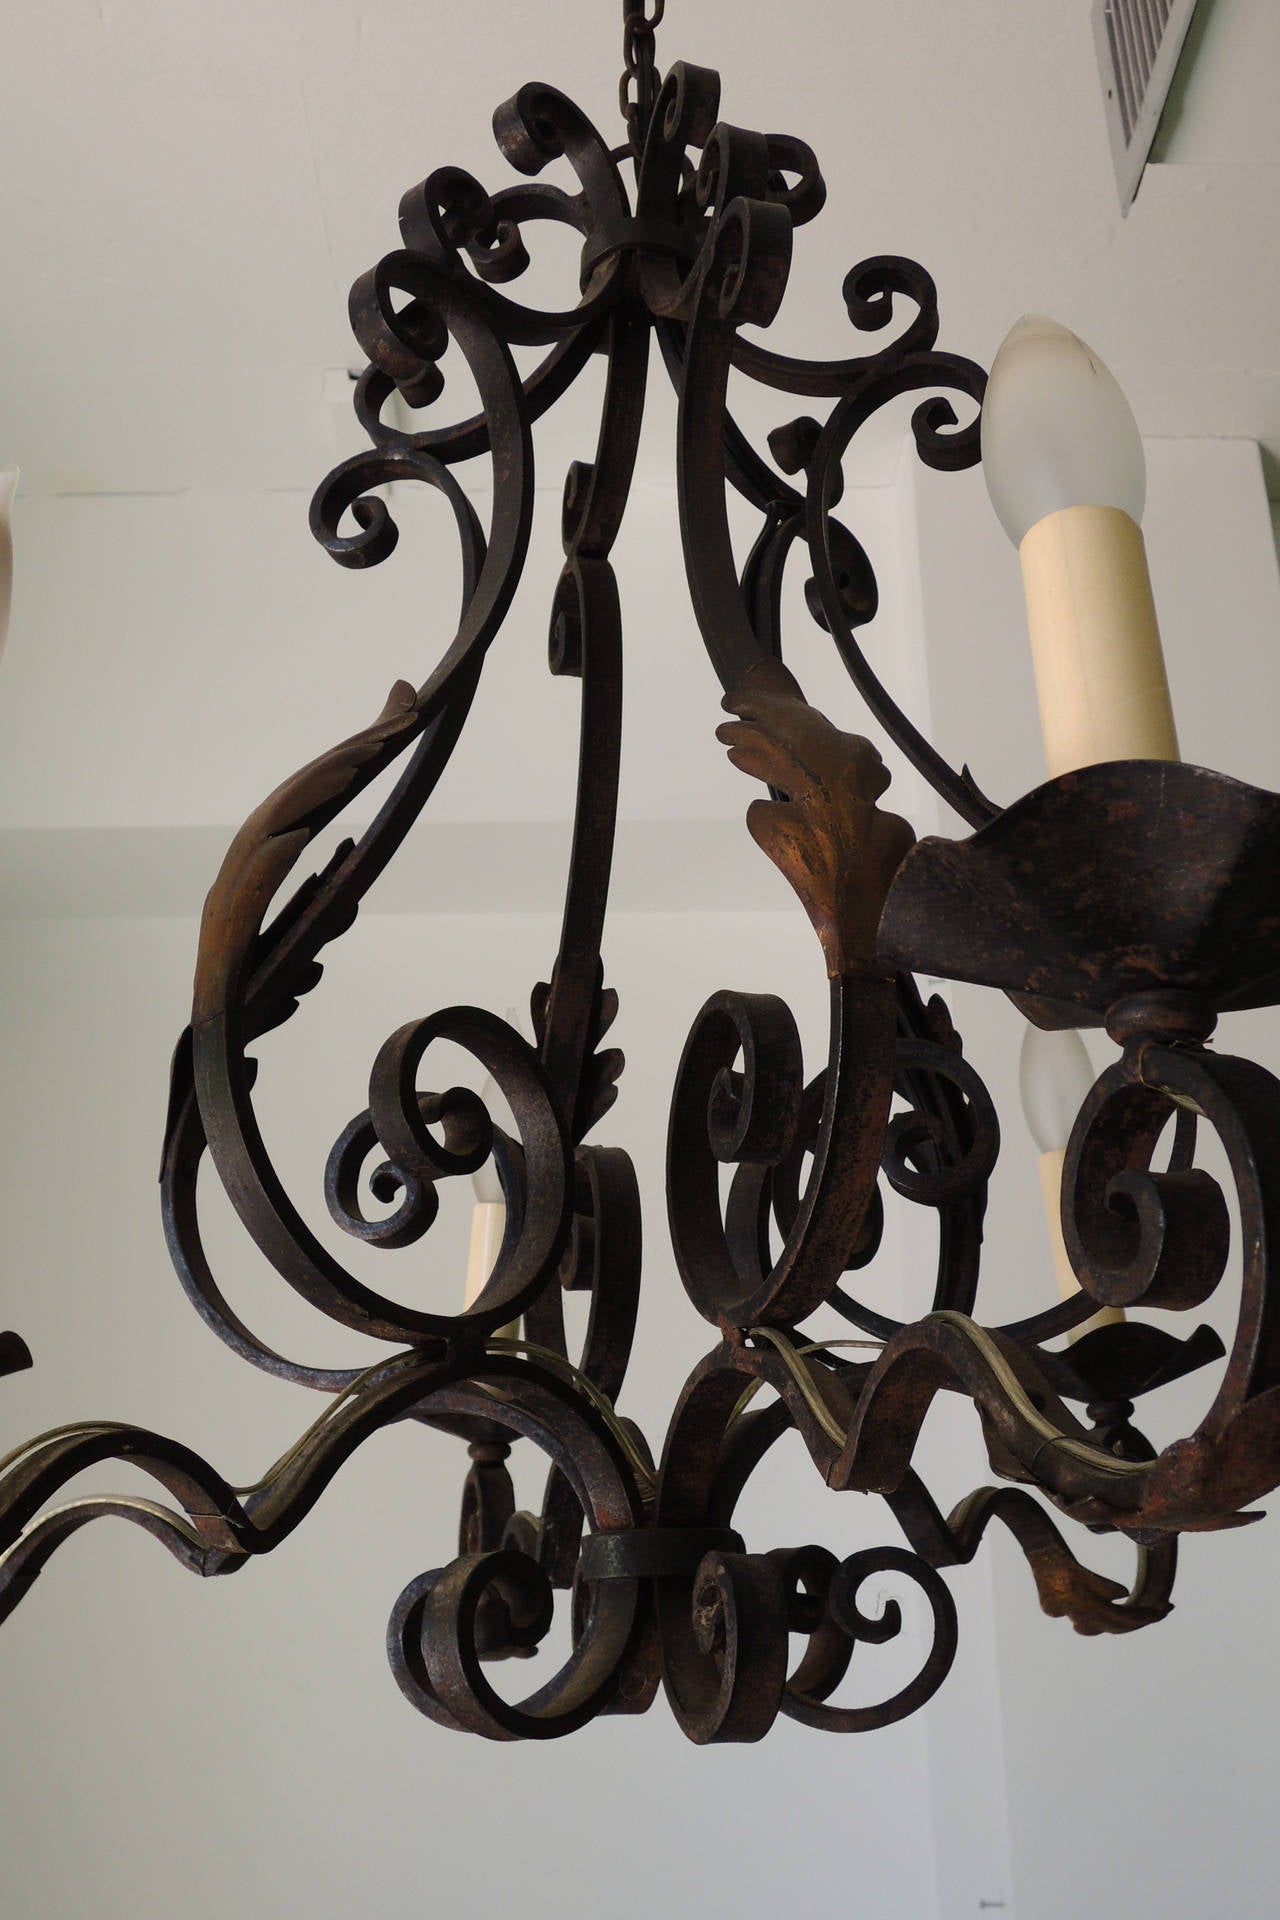 Classic French chandelier. Iron with acanthus leaves in faux bronze patina.
Iron his hard to date, but this one looks to be between the wars.